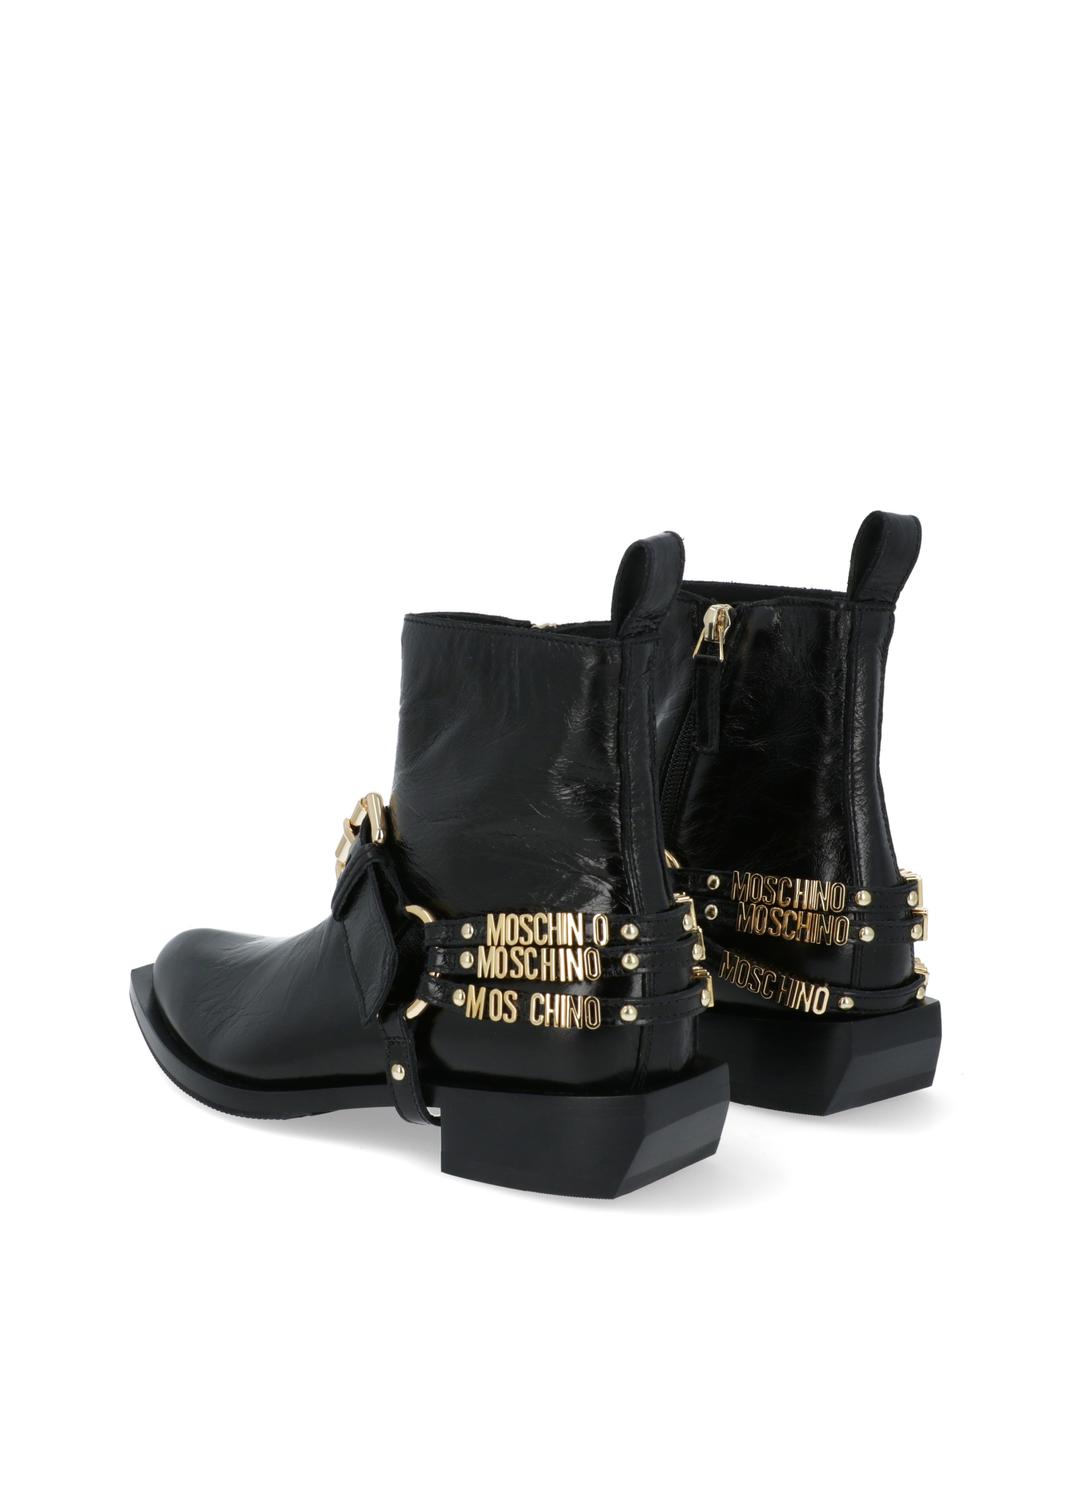 Moschino botines Texas Lettering para mujer MSC-MA21214